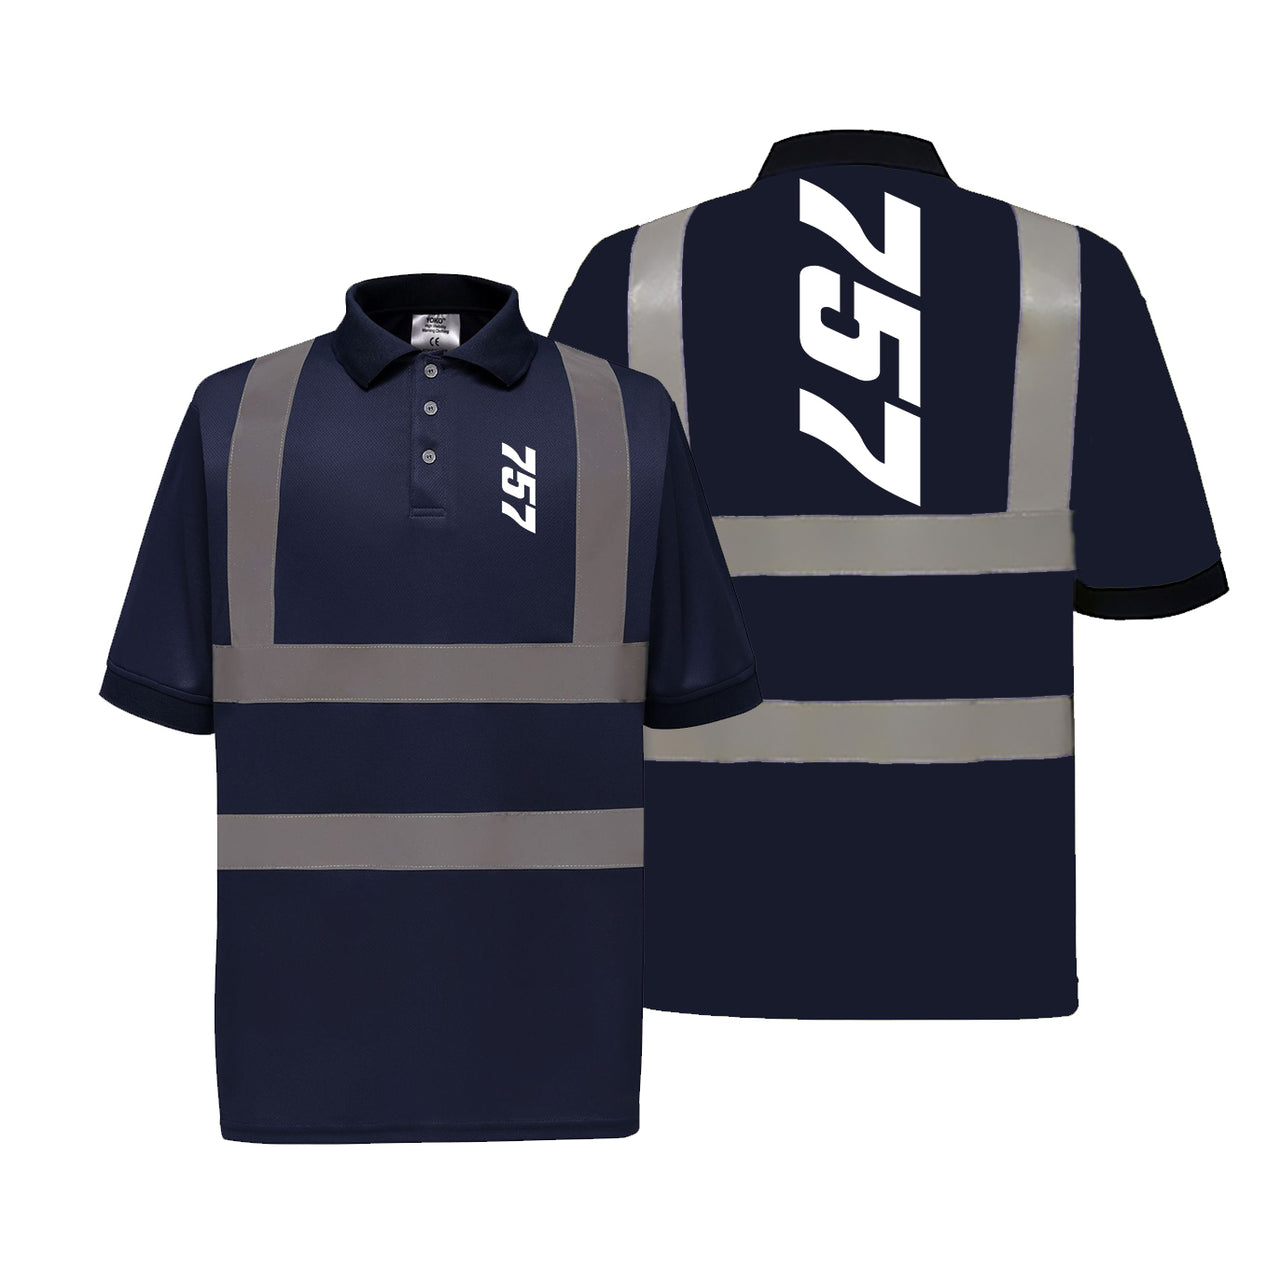 Boeing 757 Text Designed Reflective Polo T-Shirts